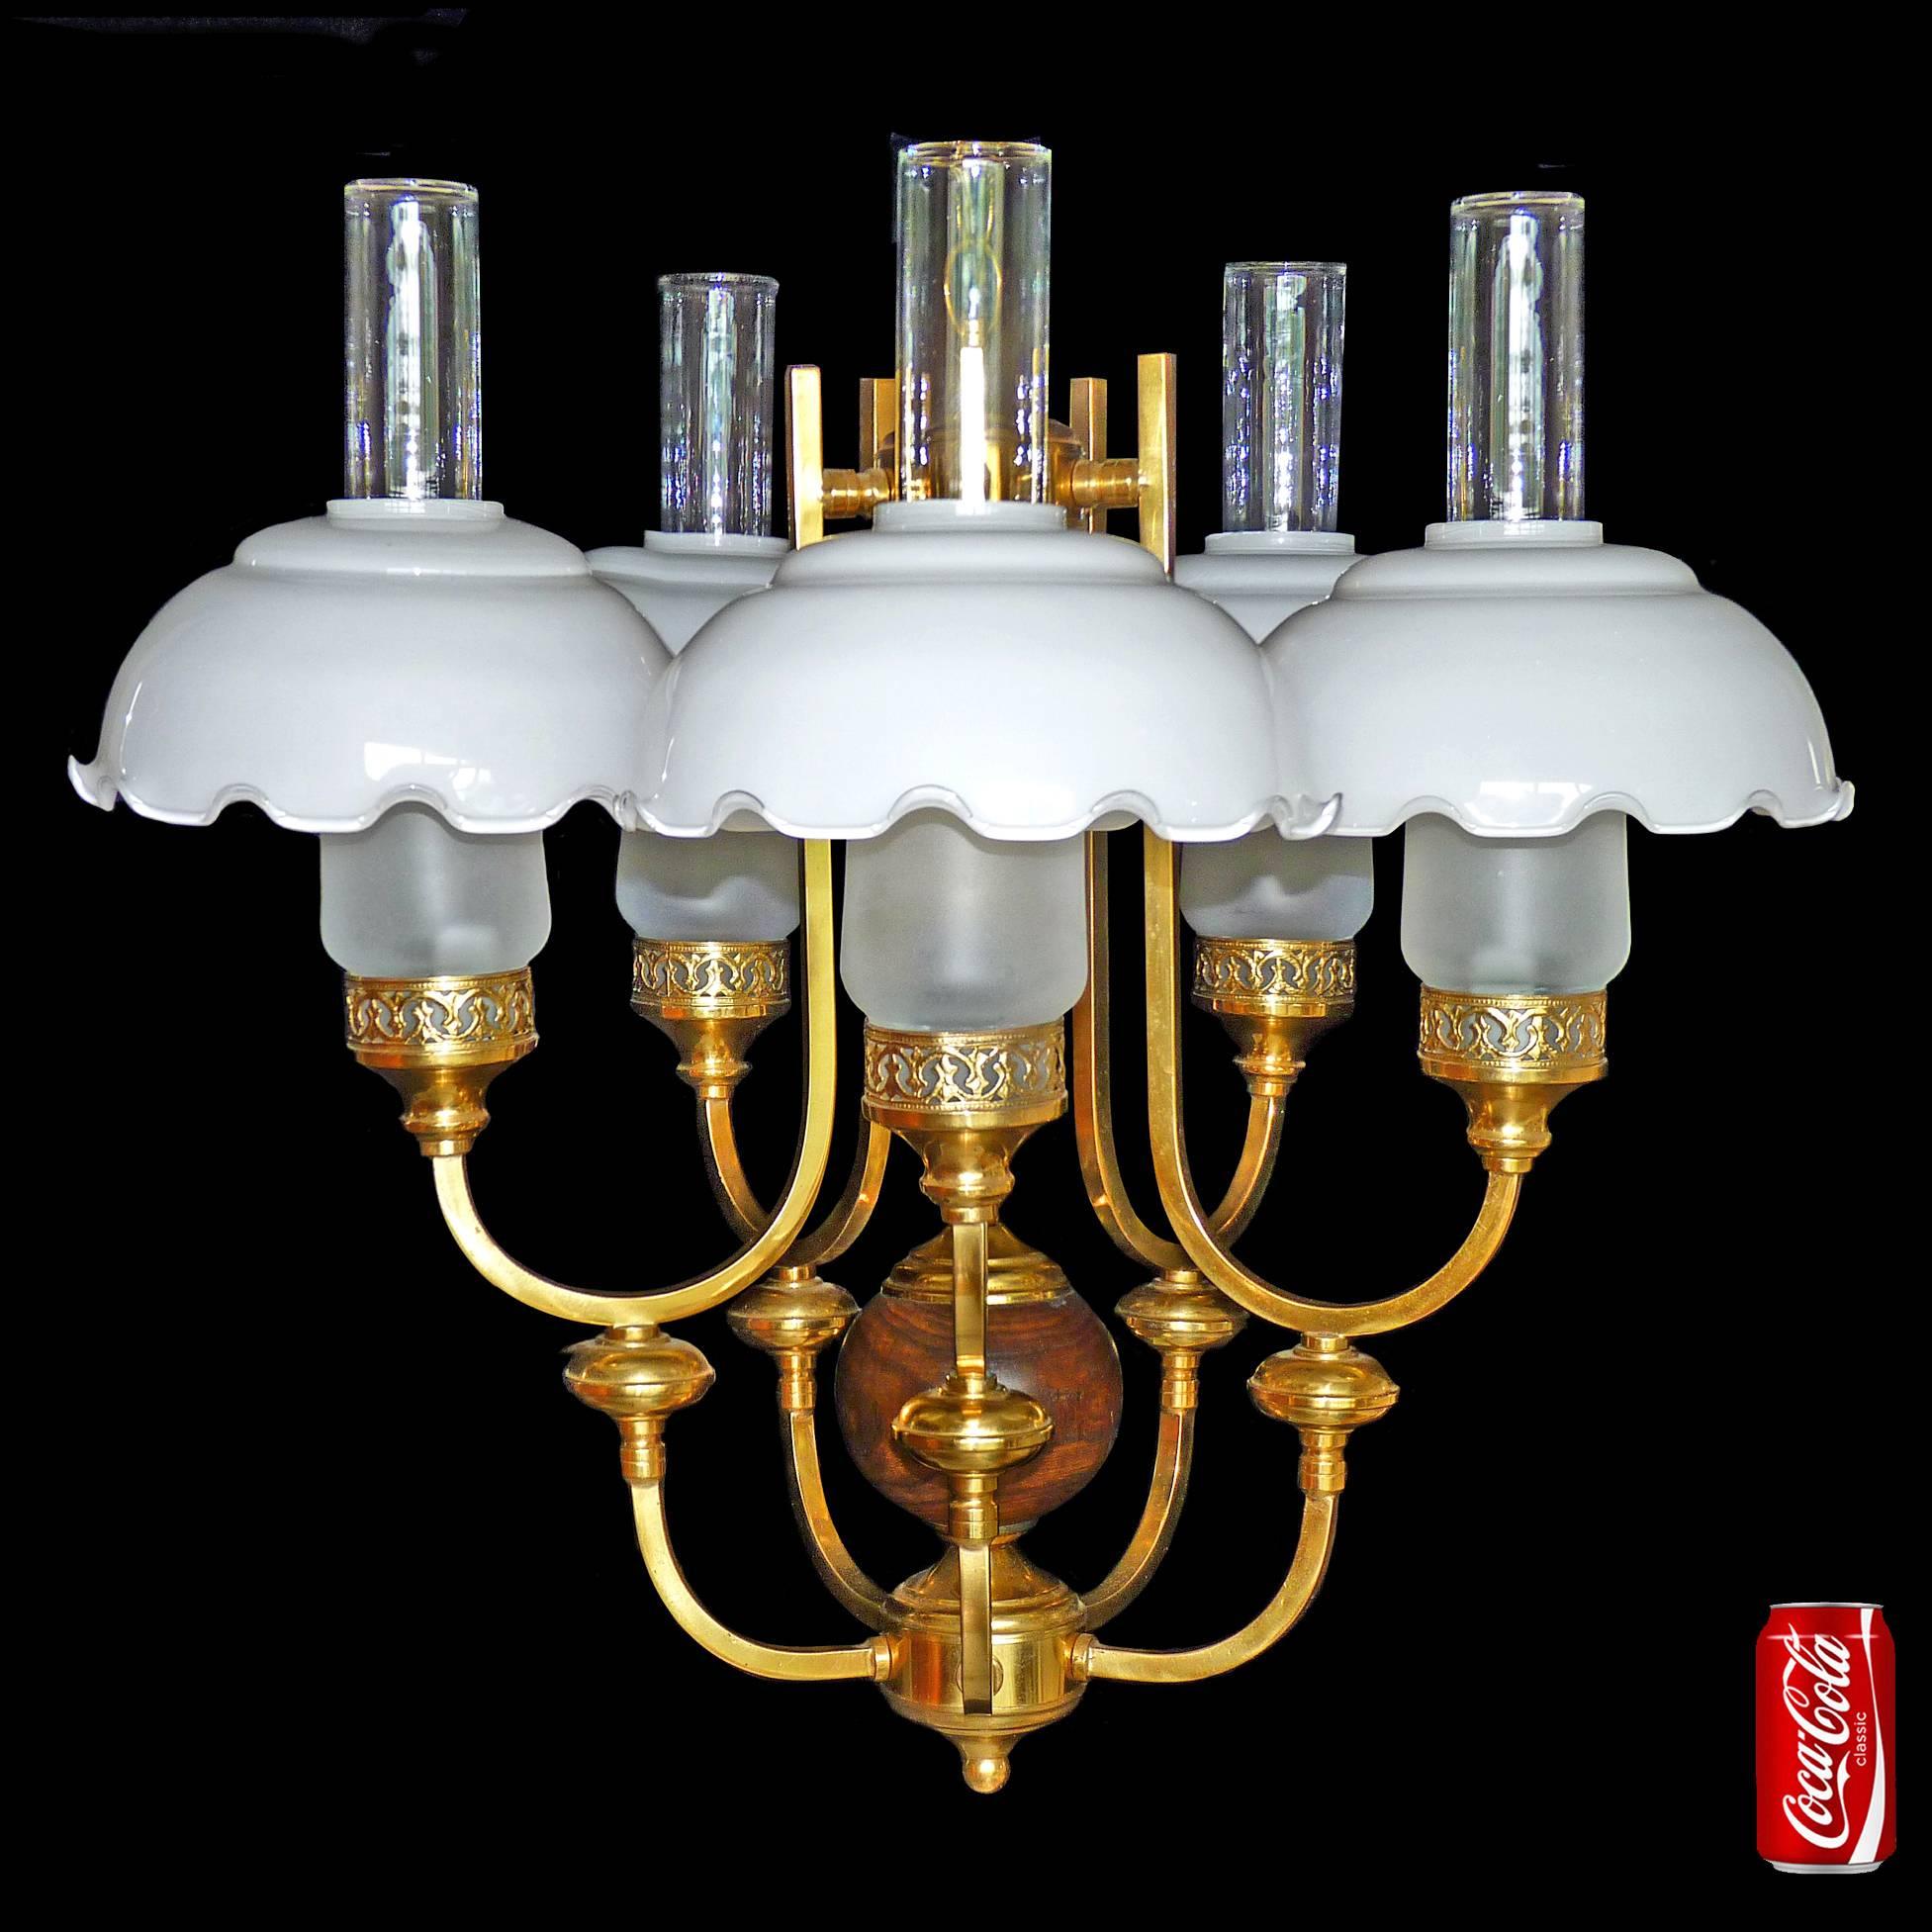 French Art Deco Library Oil Lamp Chandelier Gilt Brass Wood Opaline Glass Shades In Excellent Condition For Sale In Coimbra, PT